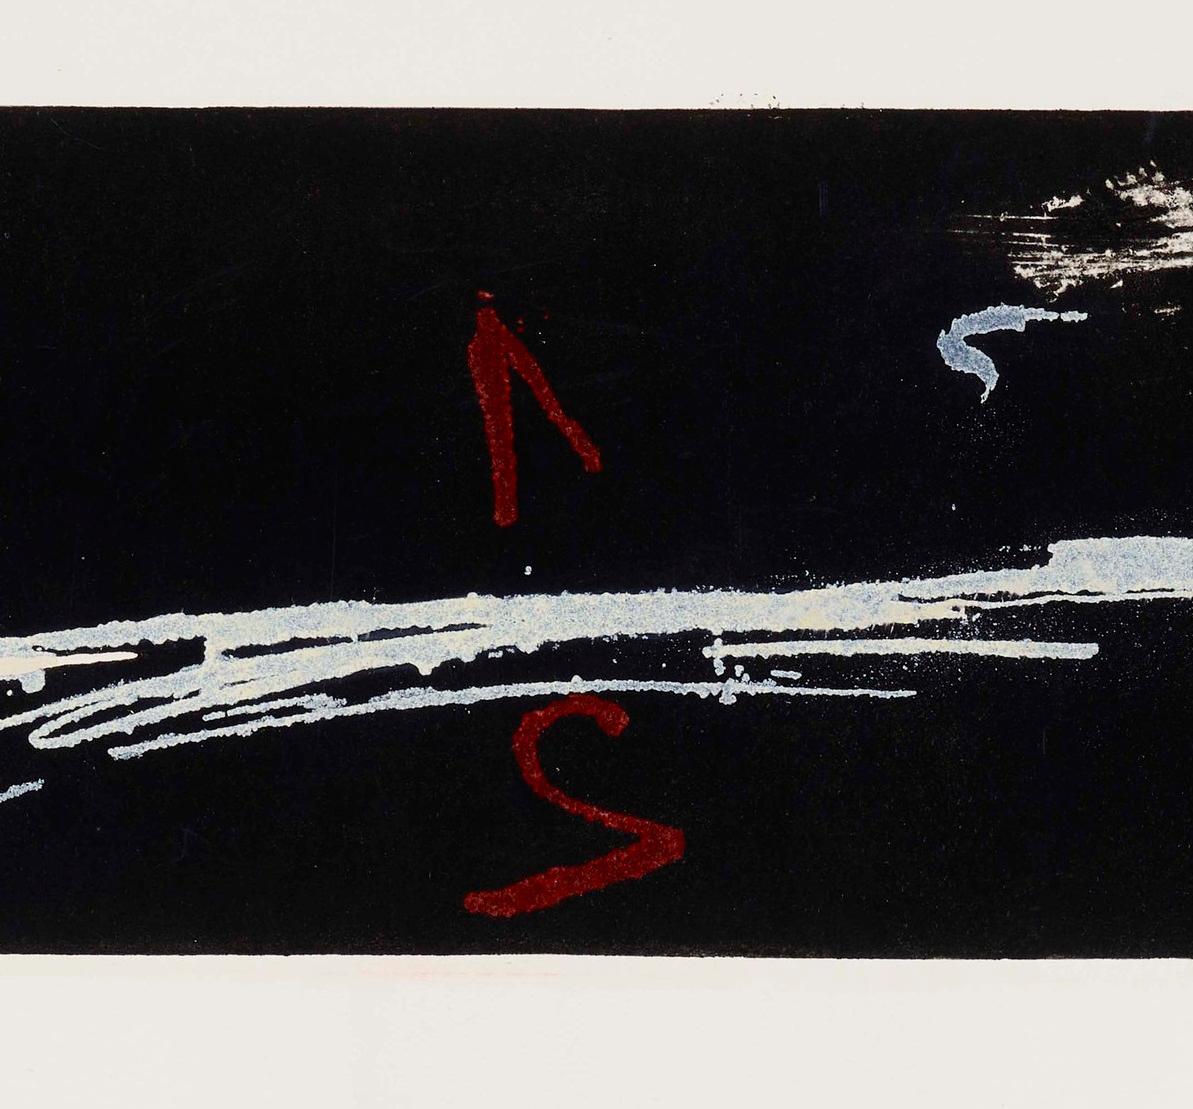 After a few years of paintings related with the Surrealism, first, and then with povera art, in the mid-1960s Tàpies' production approaches to a gestual expresionism and the by a special taste for materials, which he often mixes to produce different